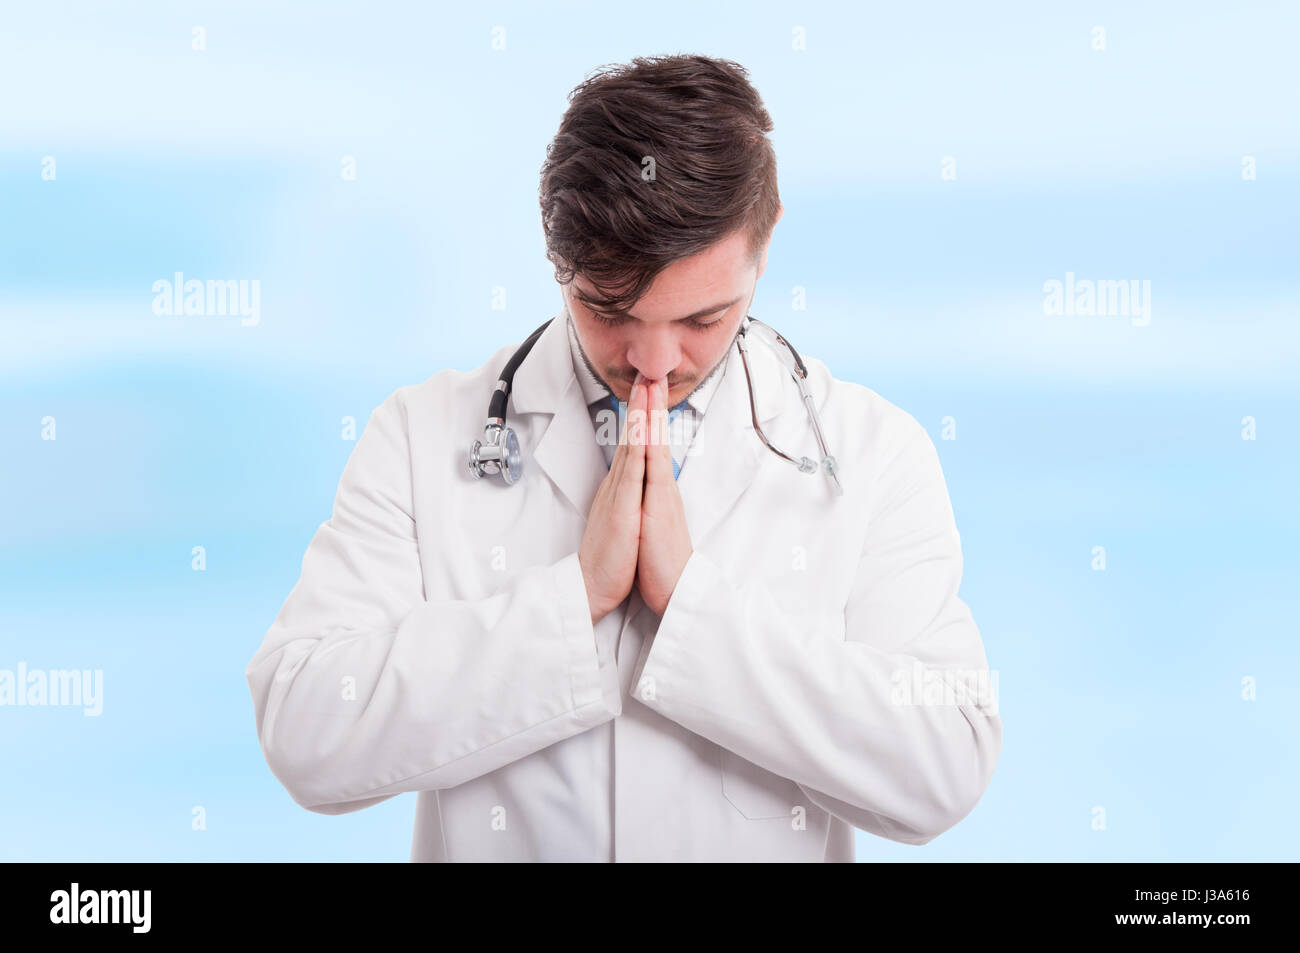 Male medic praying with hands clasped and eyes closed isolated on blue background Stock Photo